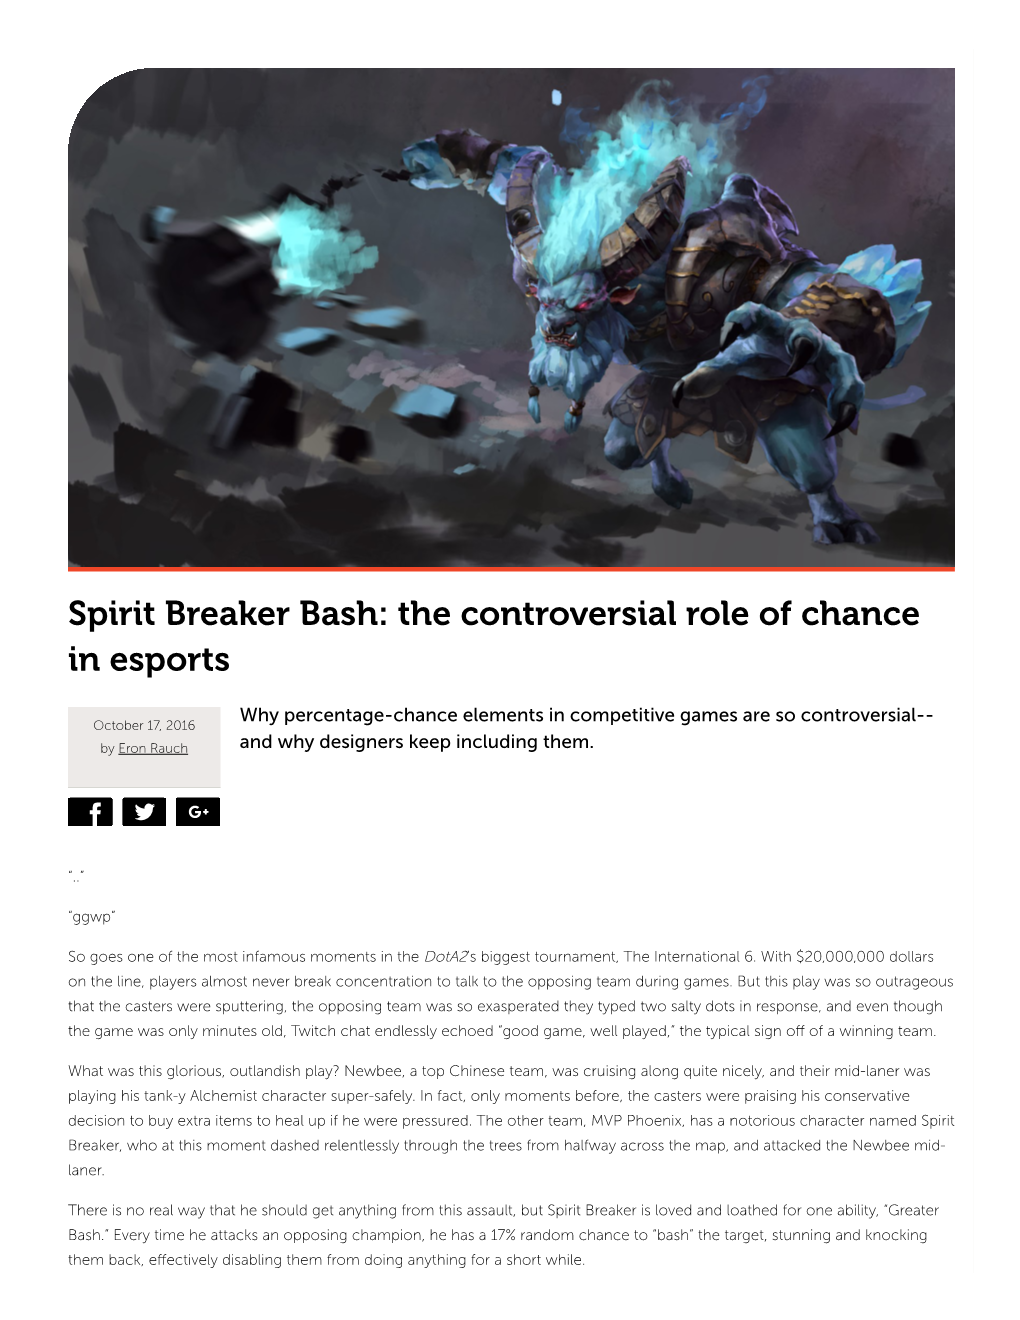 Spirit Breaker Bash: the Controversial Role of Chance in Esports